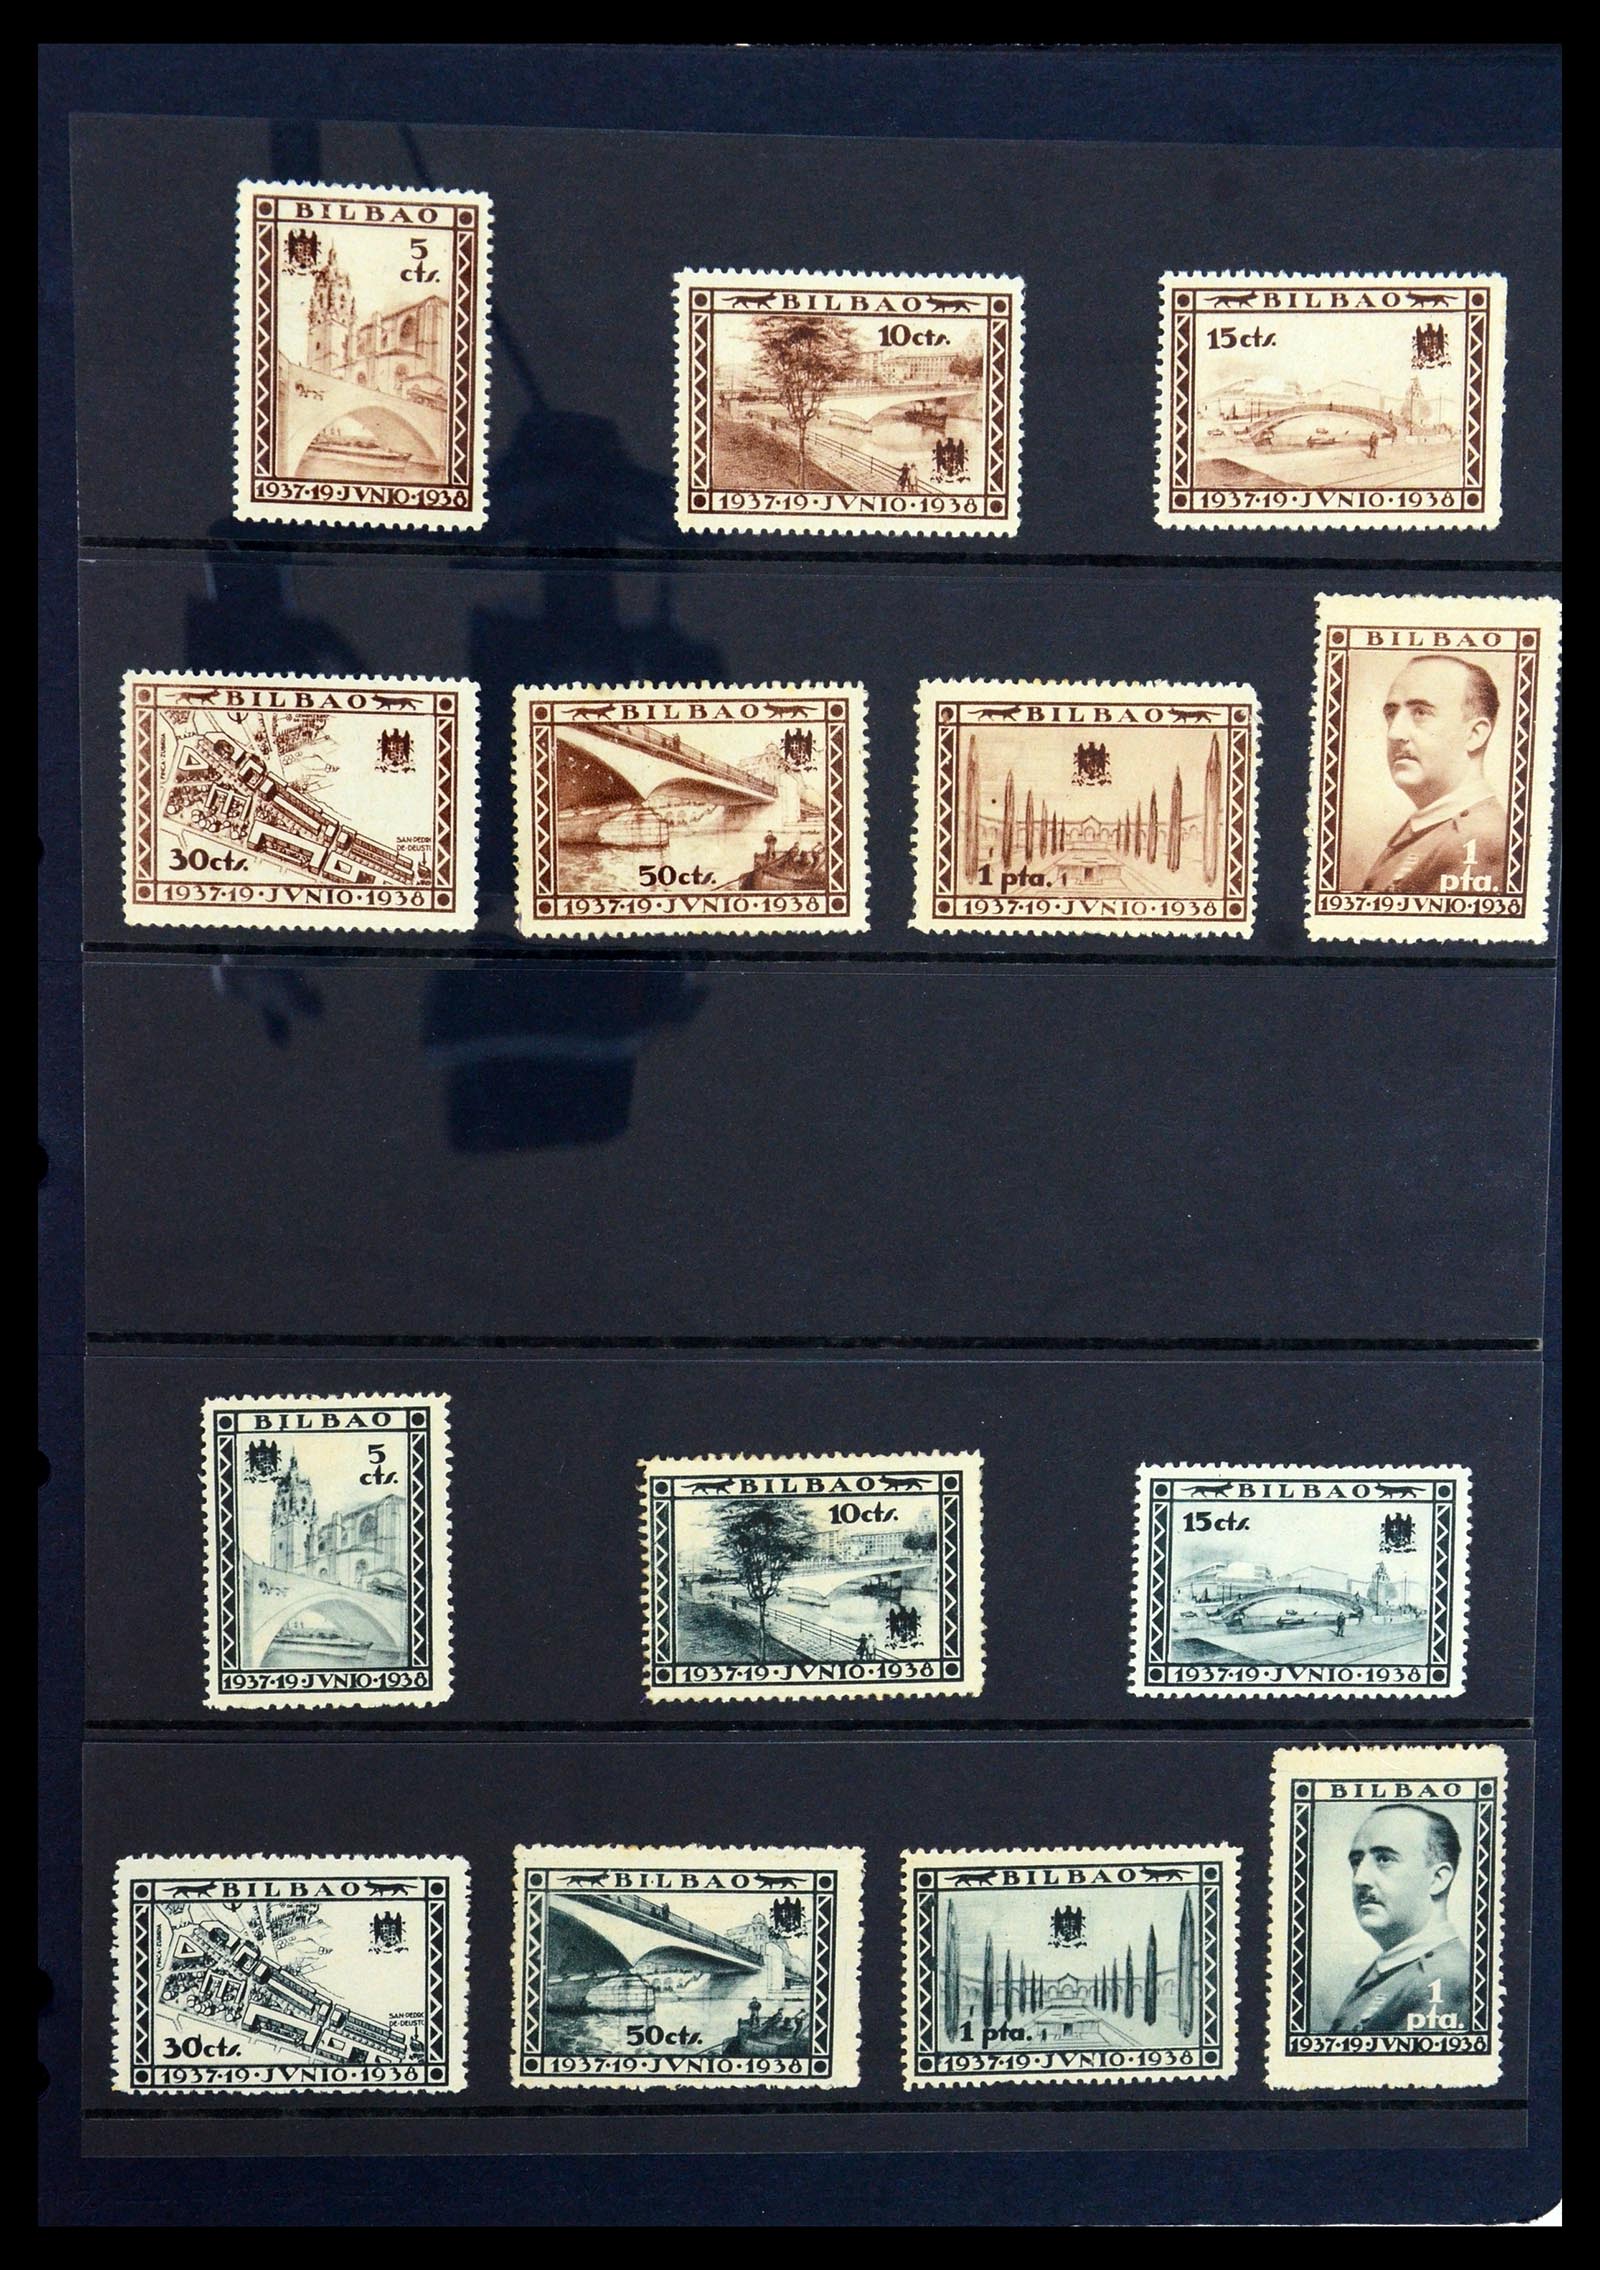 36298 058 - Stamp collection 36298 Spain local and civil war 1931-1938.